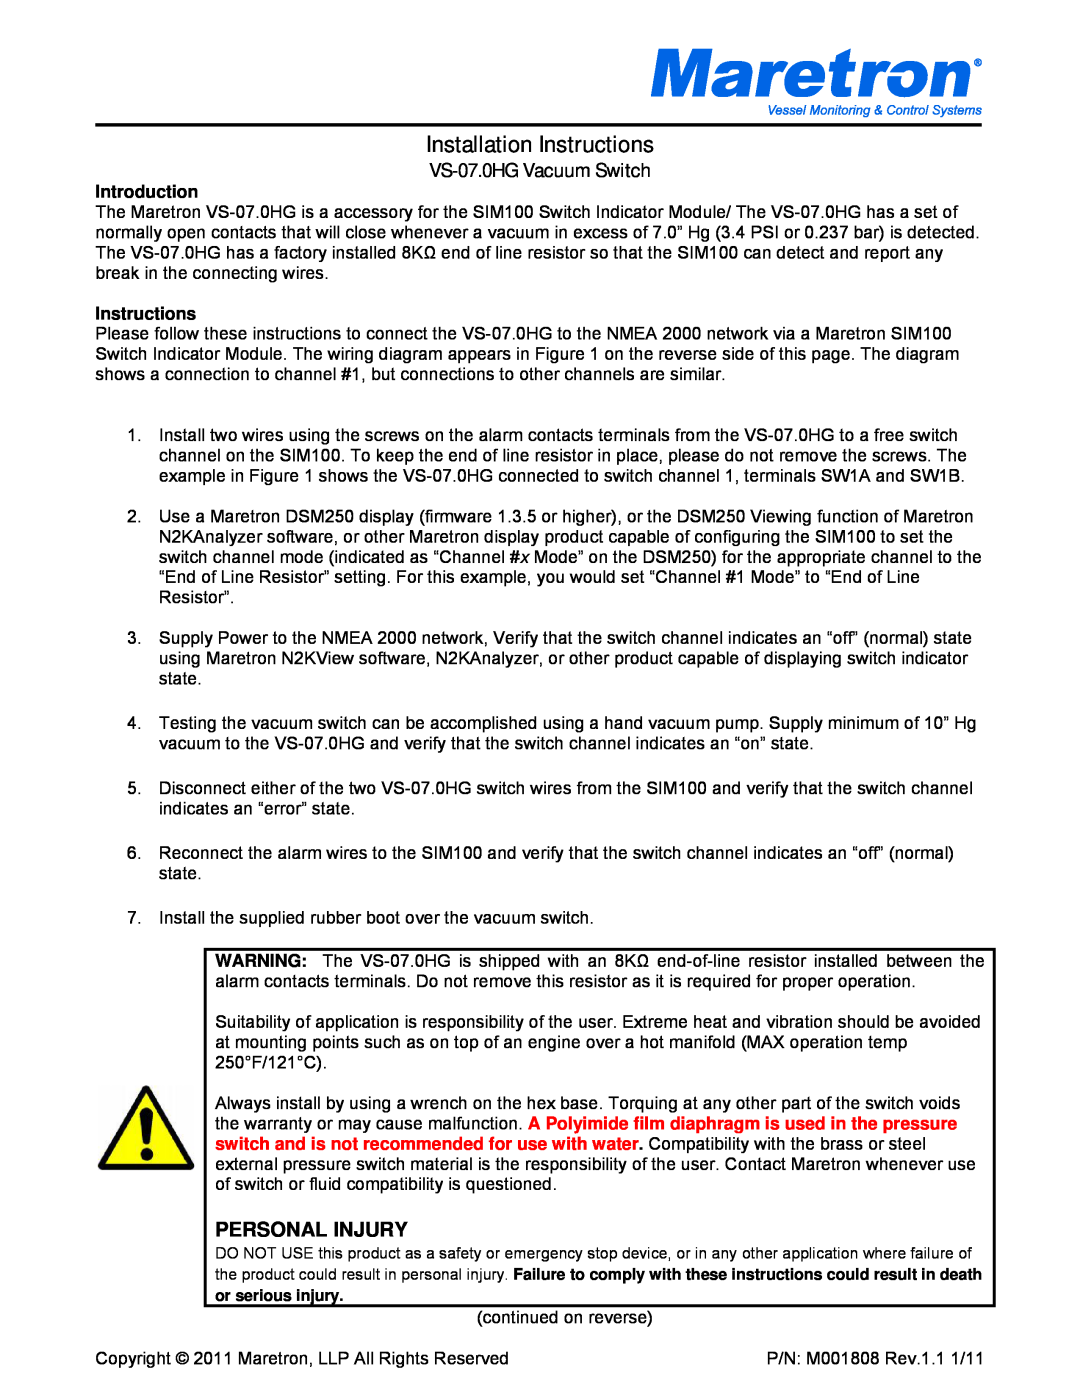 Maretron installation instructions Installation Instructions, VS-07.0HG Vacuum Switch, Introduction, Personal Injury 